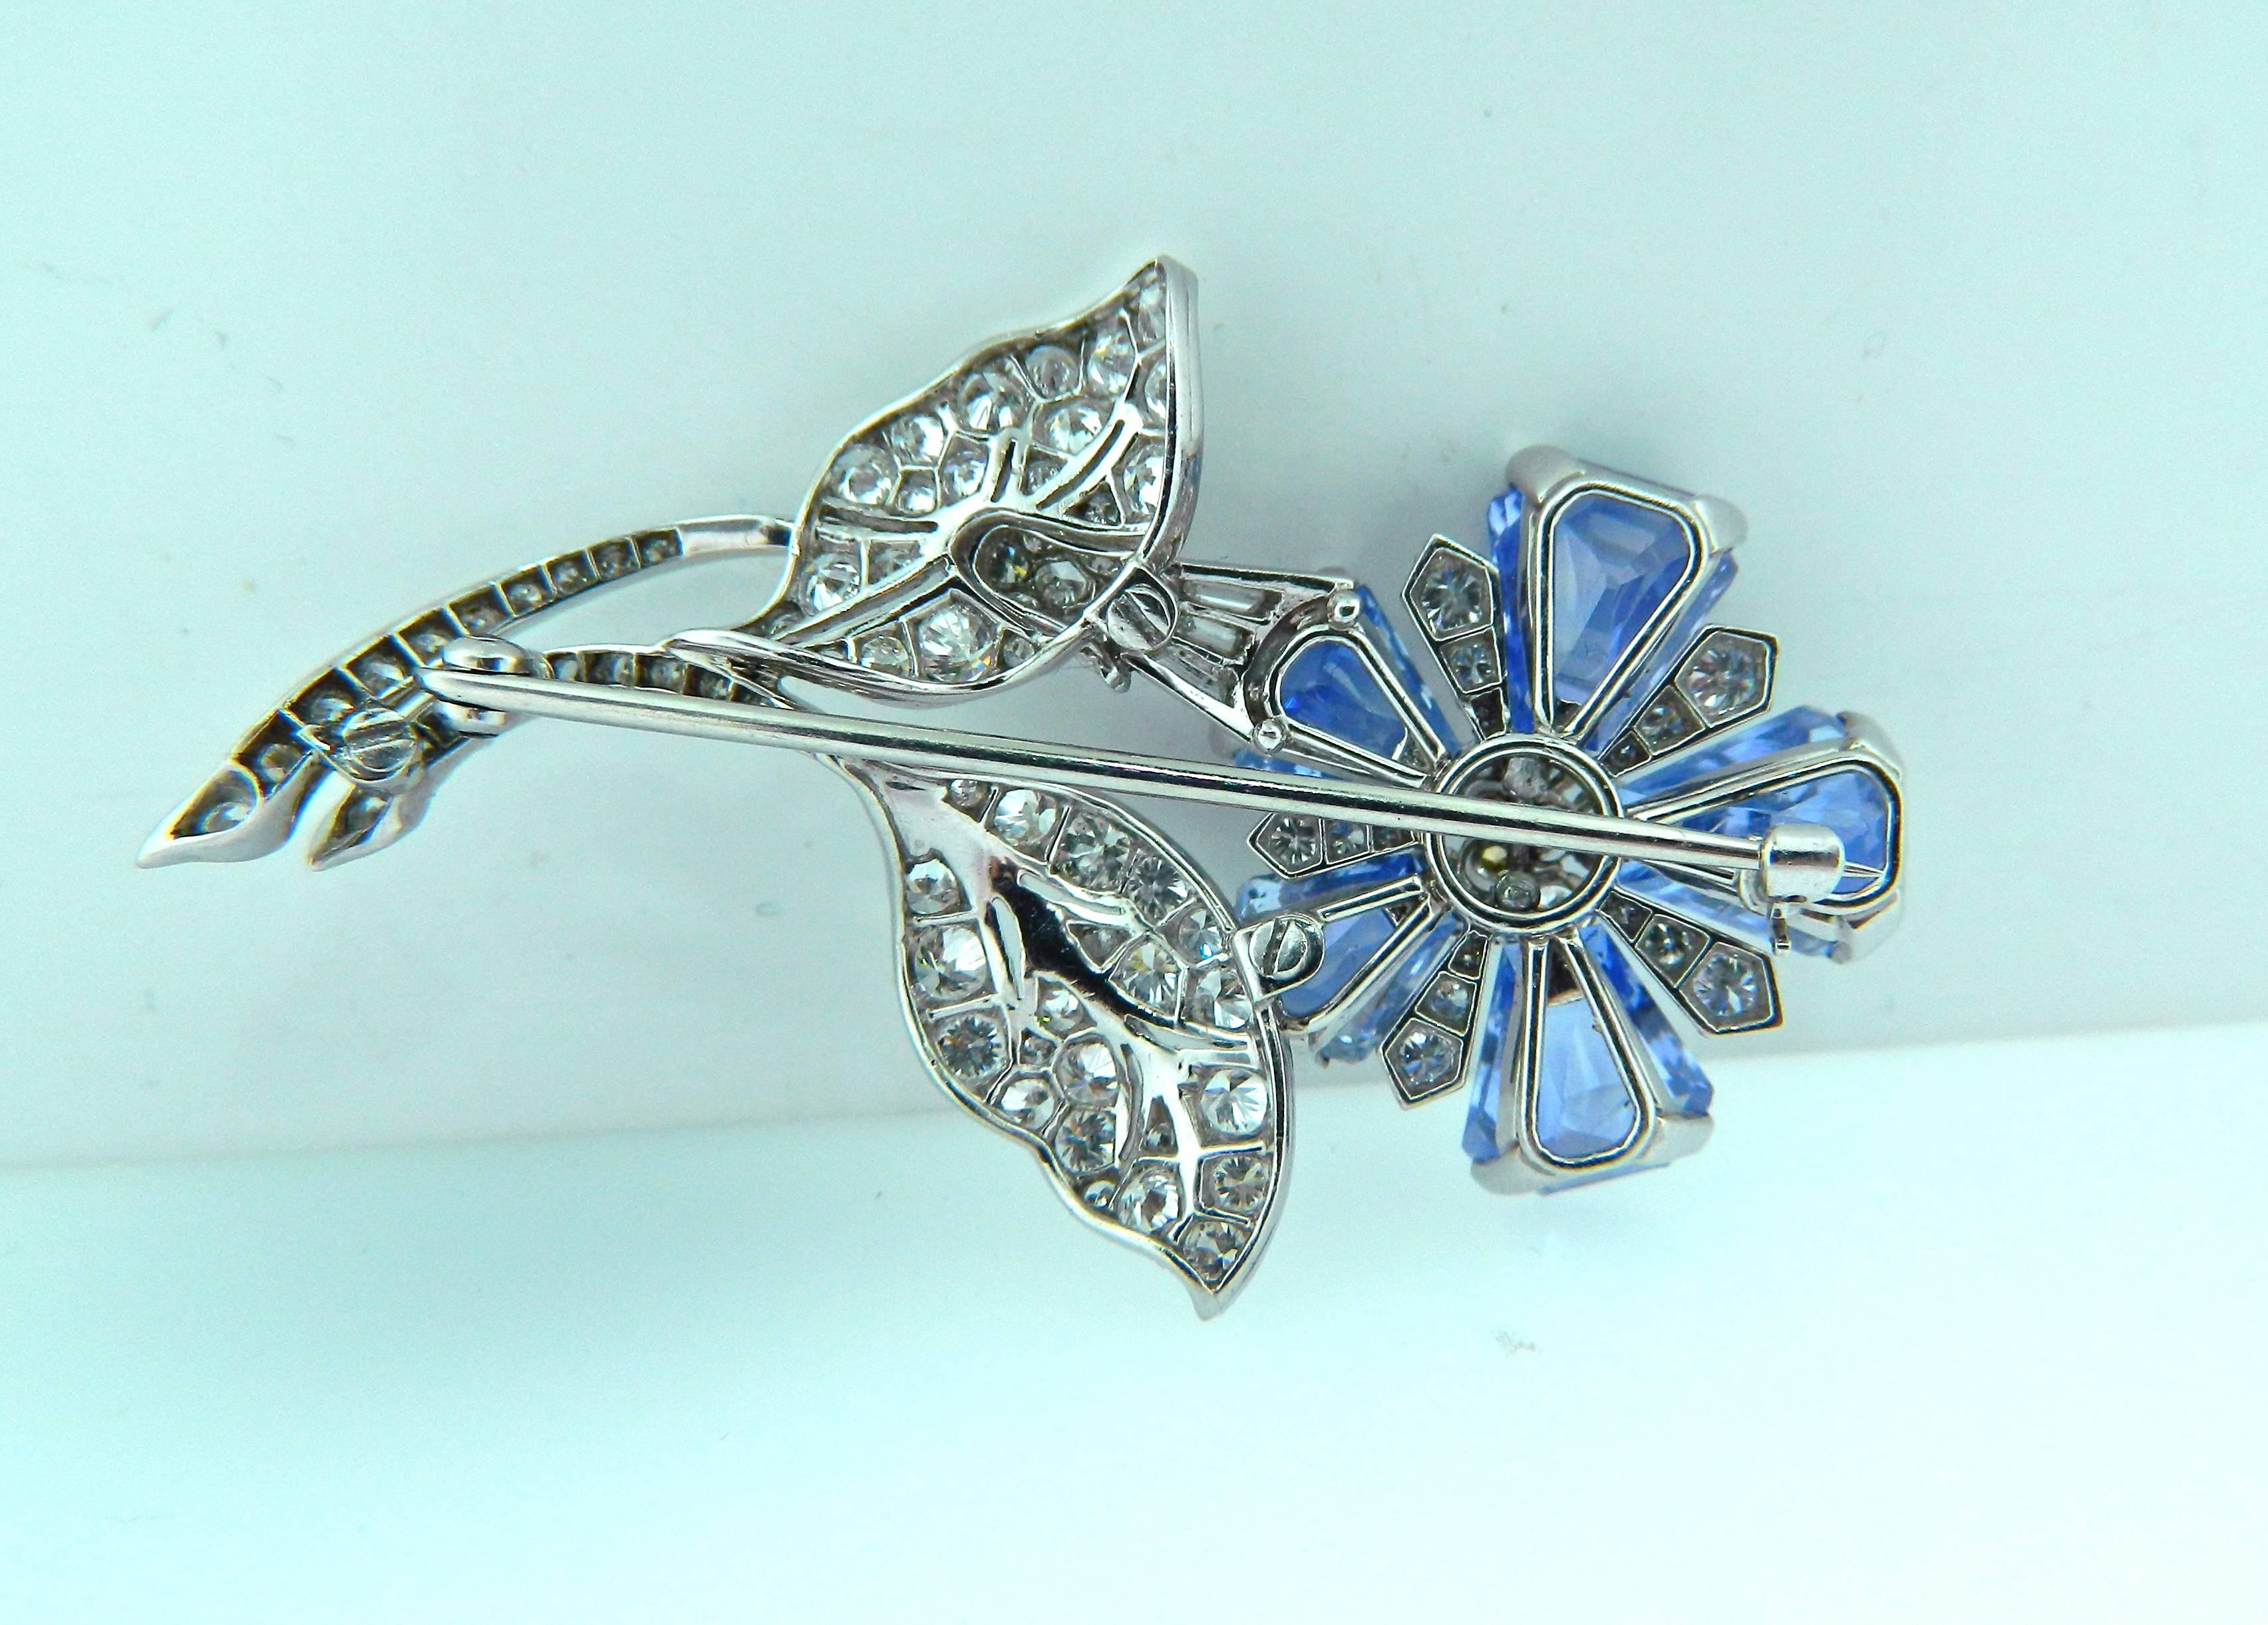 An absolutely stunning and rare sapphire, diamond and platinum floral brooch from the late art deco/early retro period.  Approximately 10 carats of fine kite shape sapphires.  Superb craftsmanship!